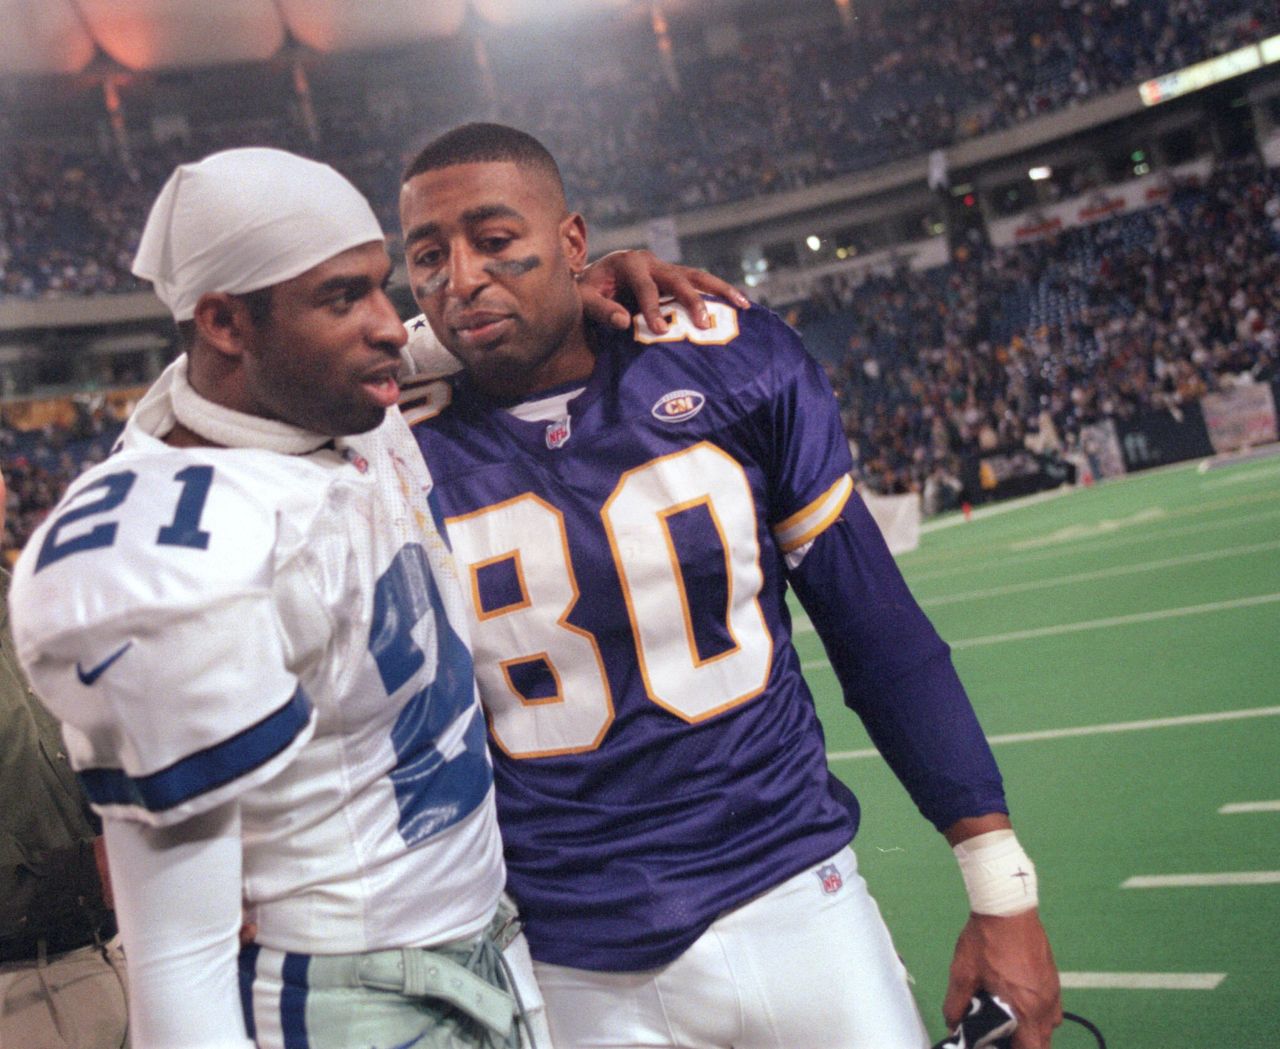 Sanders of the Dallas Cowboys (left) and Minnesota Vikings wide receiver Cris Carter greet each other following a Vikings playoff victory in 1999.